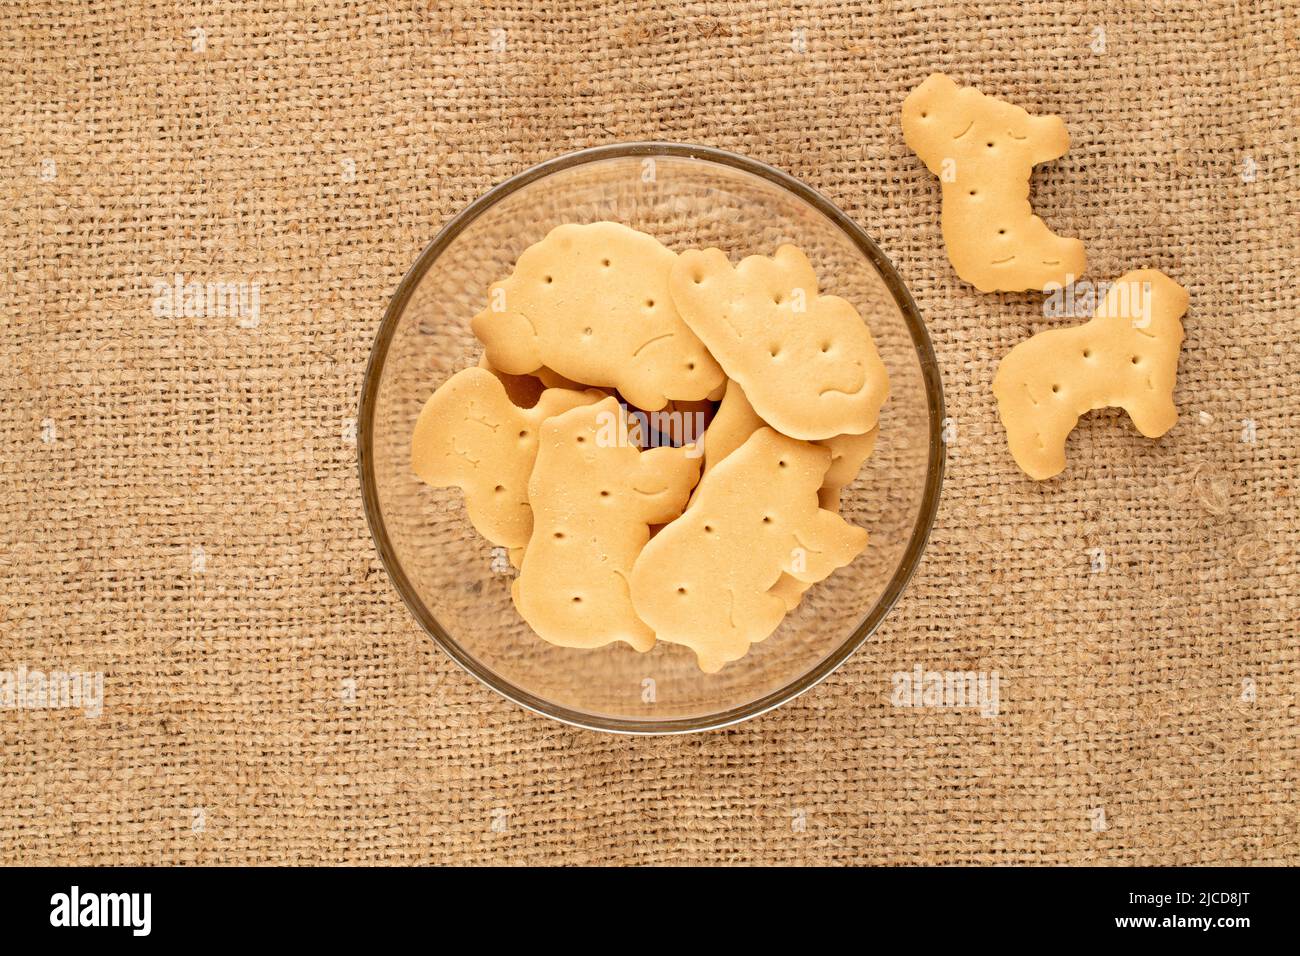 Several homemade  cookies in glassware on jute fabric, close-up, top view. Stock Photo